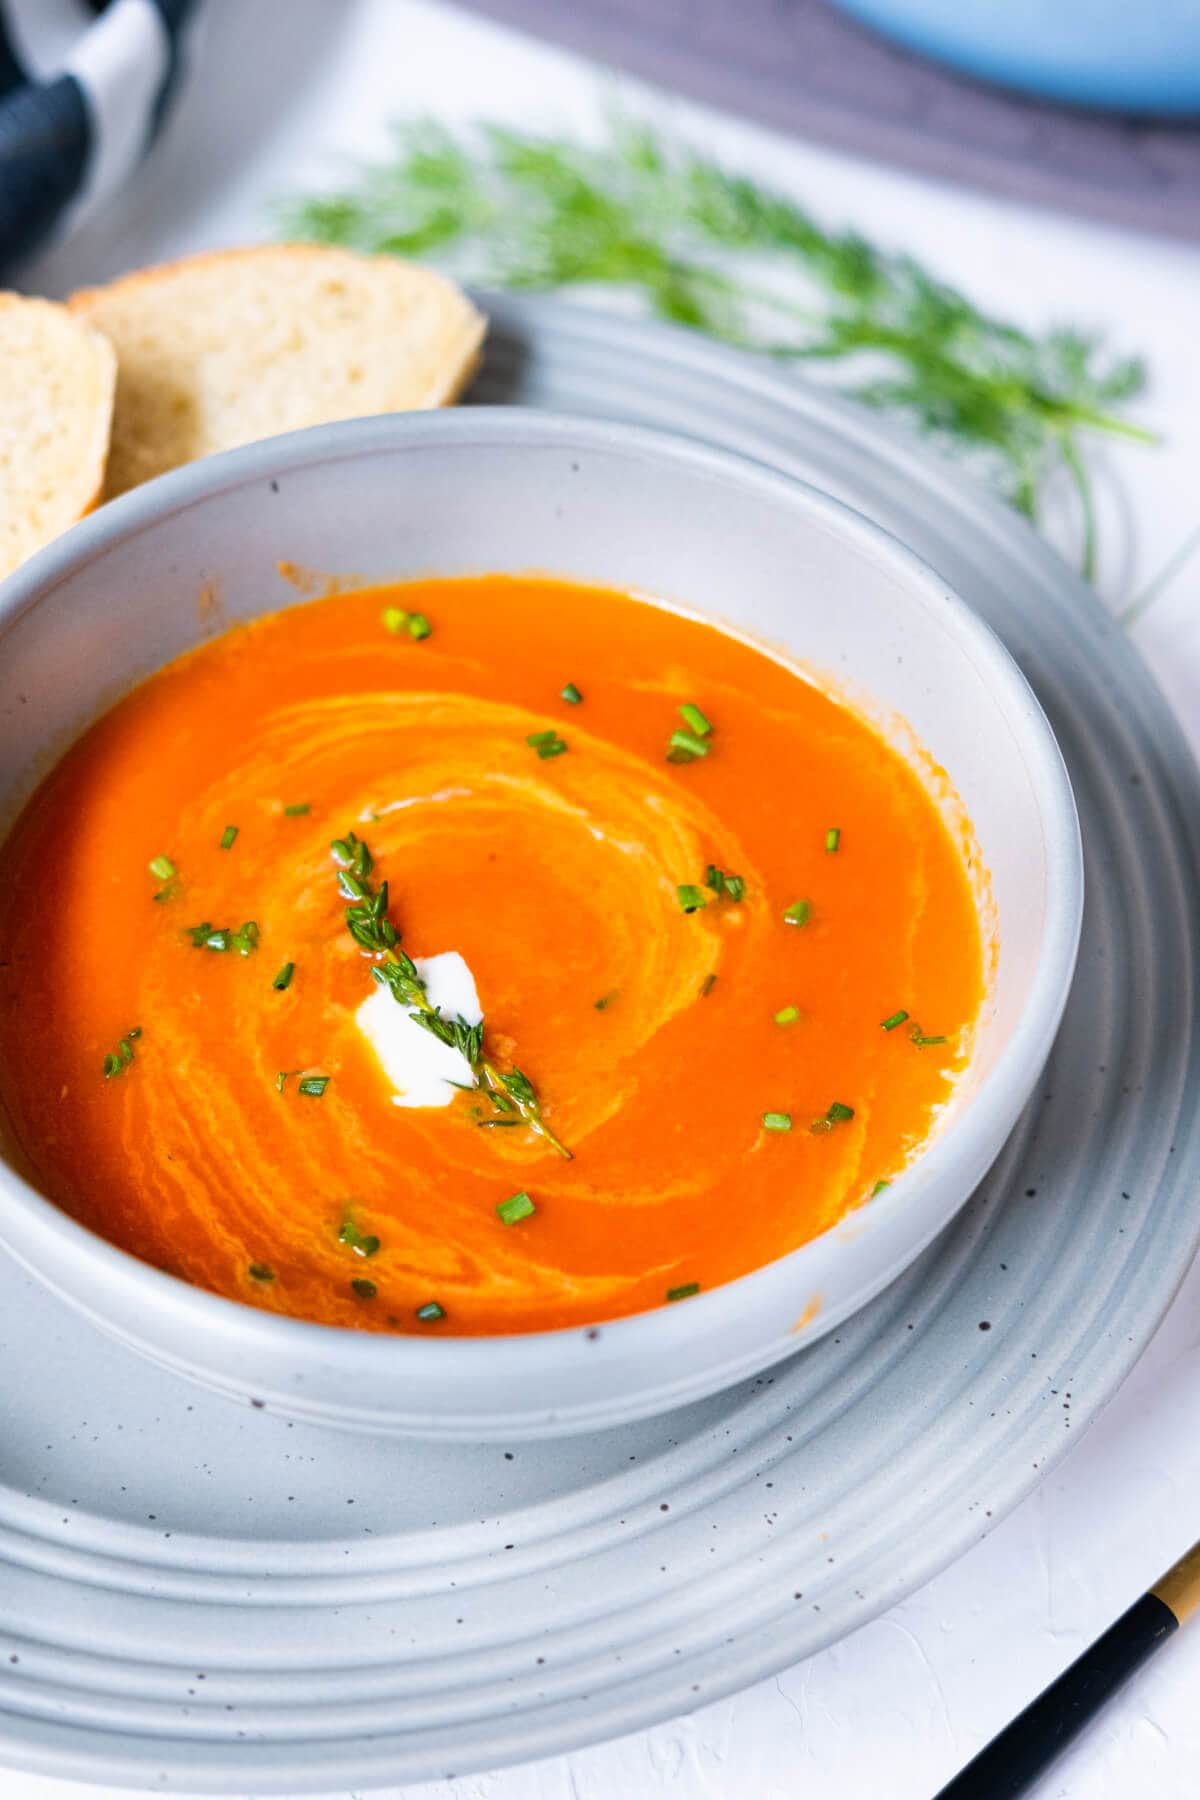 Red tomato soup served in a grey bowl on top of a plate with French bread on the side.